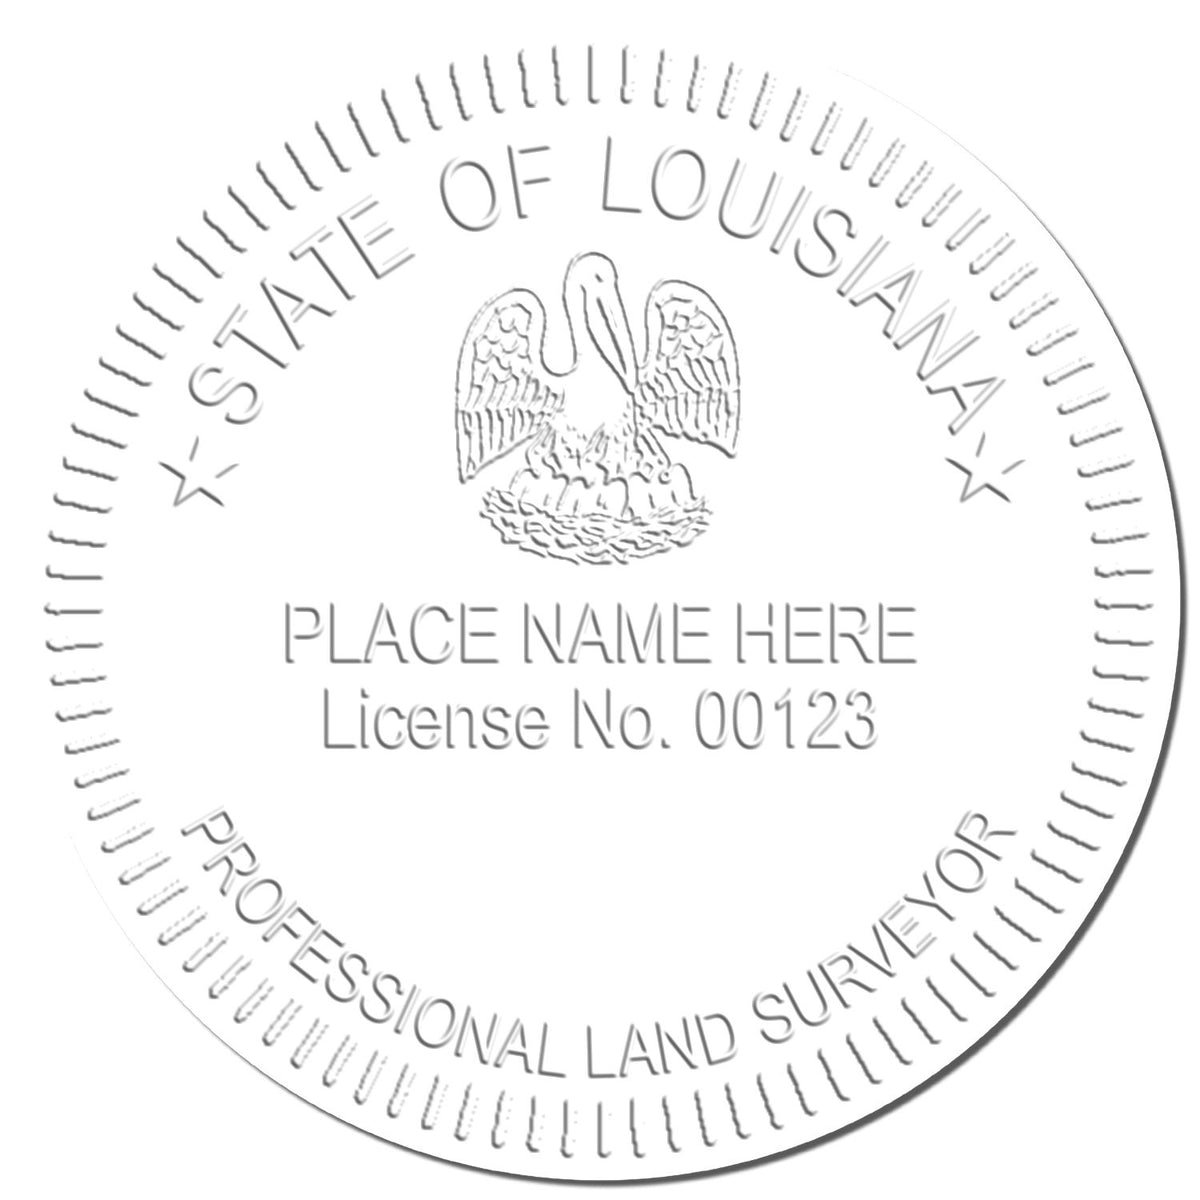 This paper is stamped with a sample imprint of the Long Reach Louisiana Land Surveyor Seal, signifying its quality and reliability.